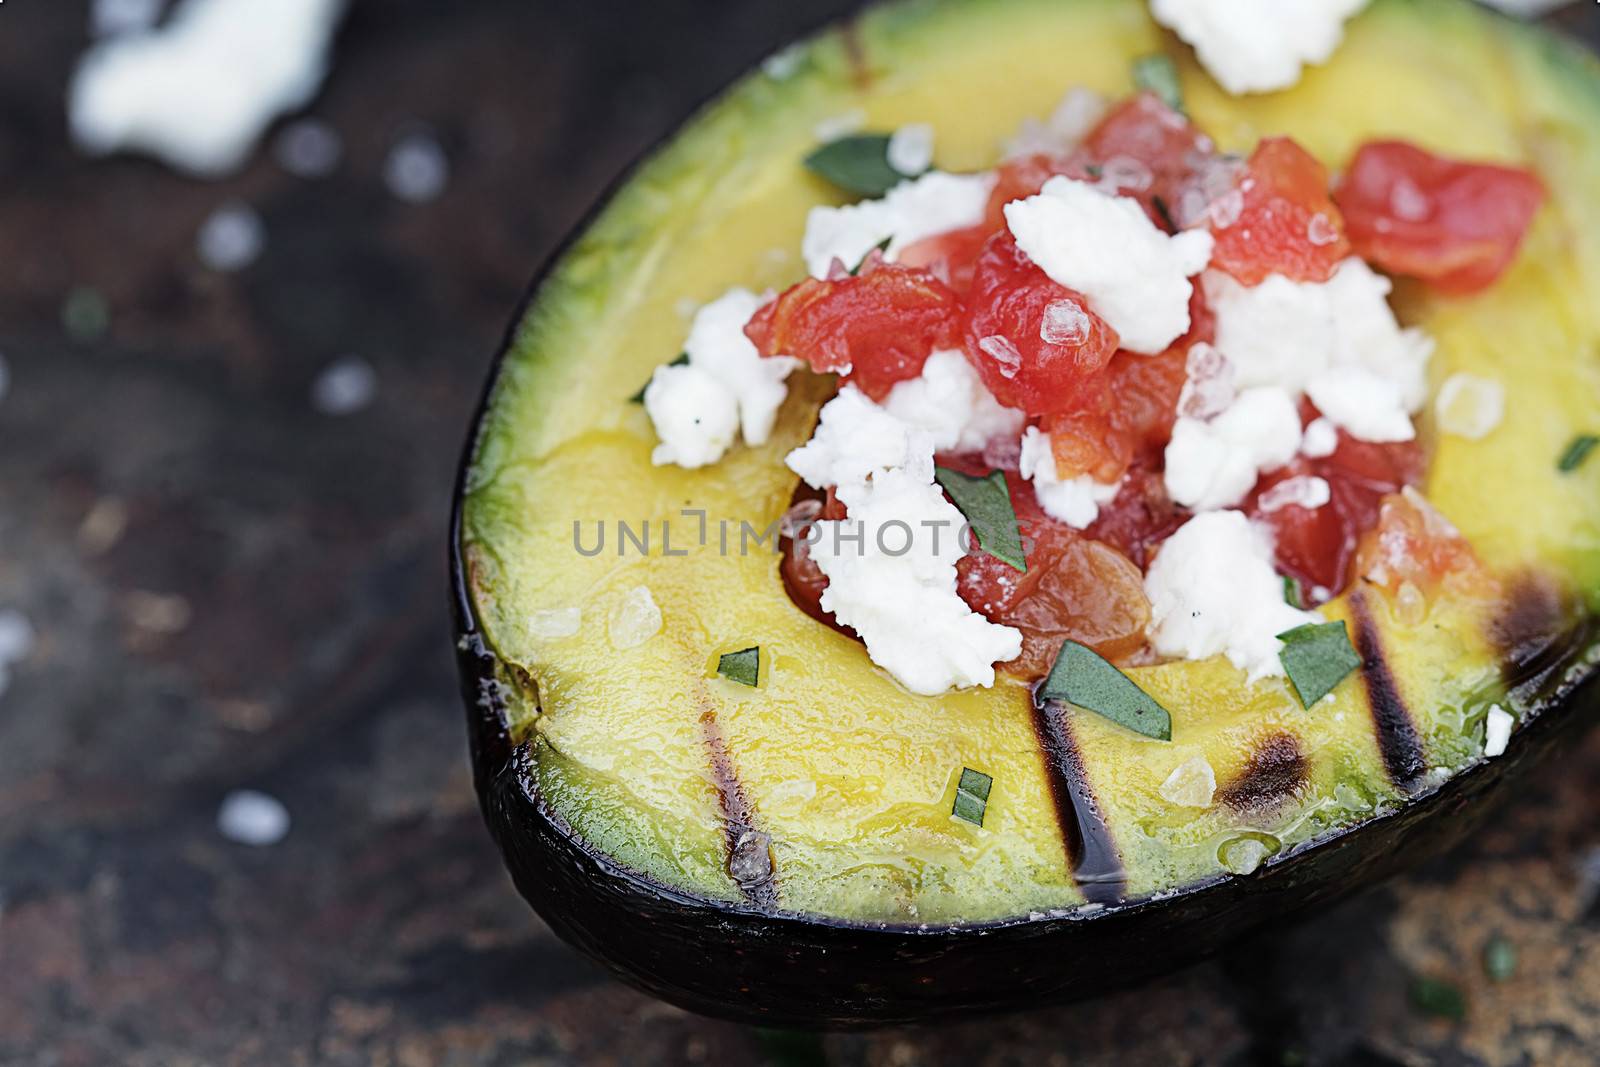 Grilled avocados filled with diced tomatoes and feta cheese and garnished with olive oil and freshly chopped parsley. Extremely shallow depth of field with selective focus on the foreground.